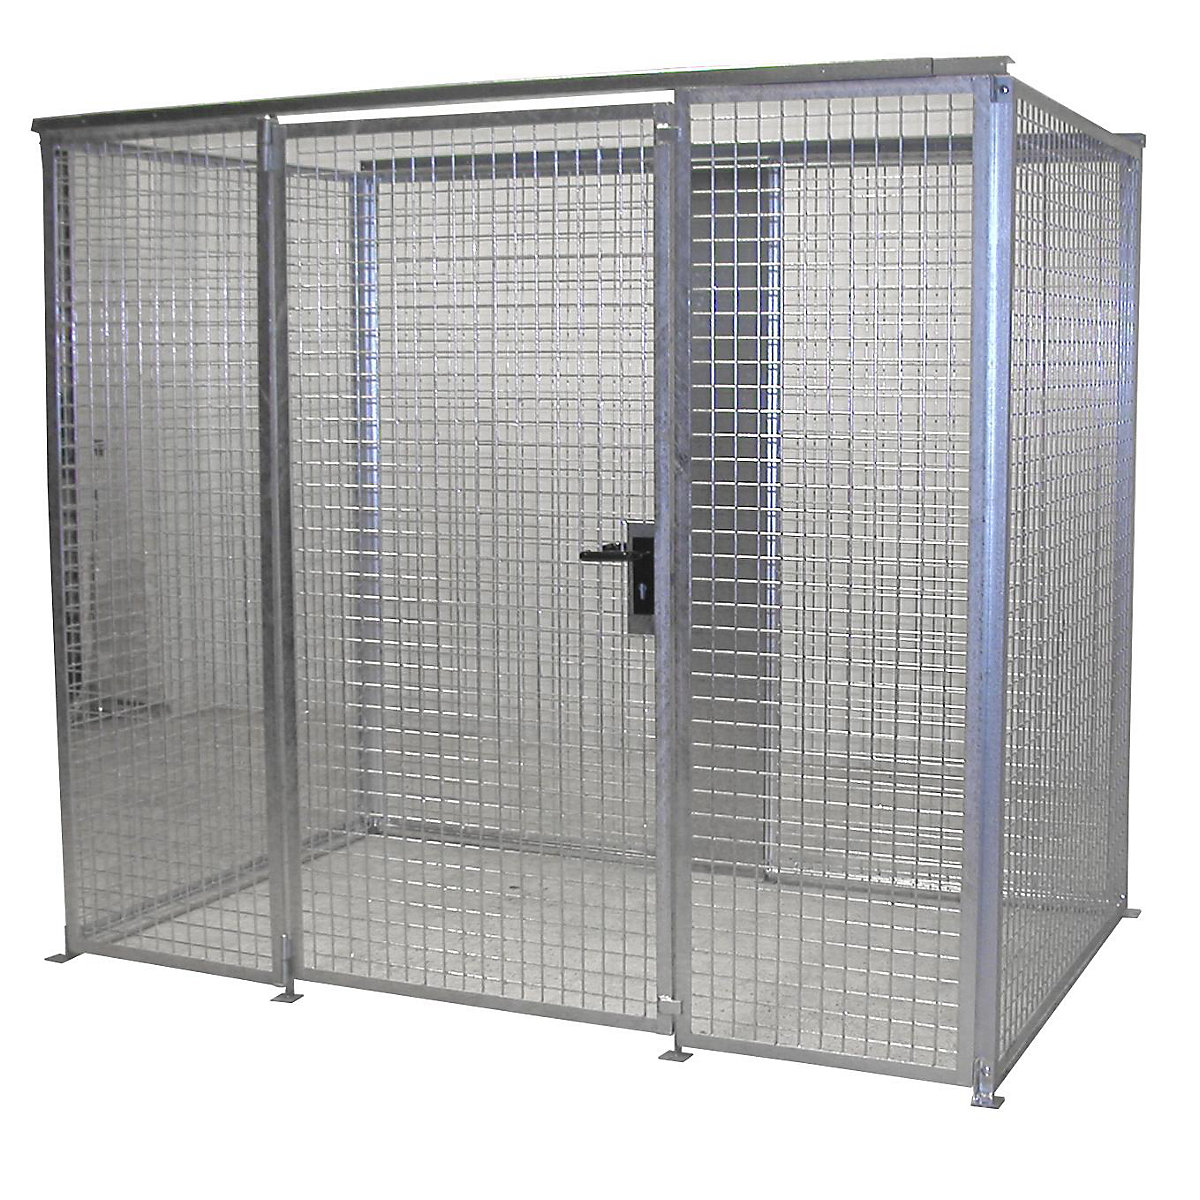 EUROKRAFTpro – Mesh gas cylinder cage, without roof, with single hinged door, WxD 2400 x 1500 mm